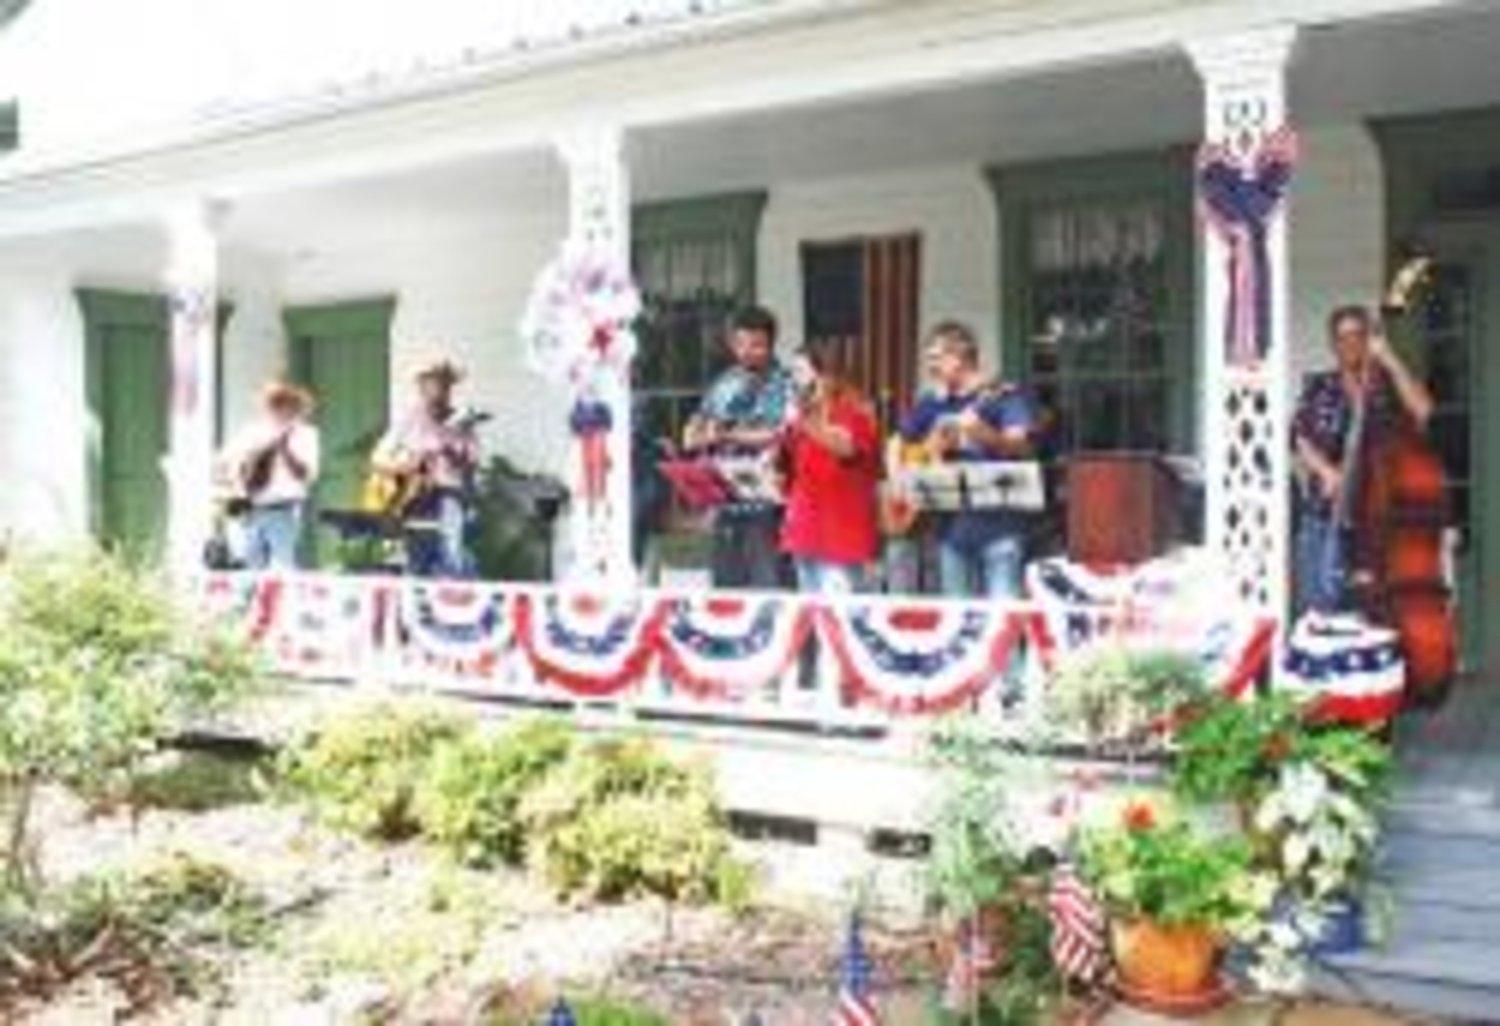 There was some great patriotic music Saturday by this group of musicians and singers during festivities at the park.